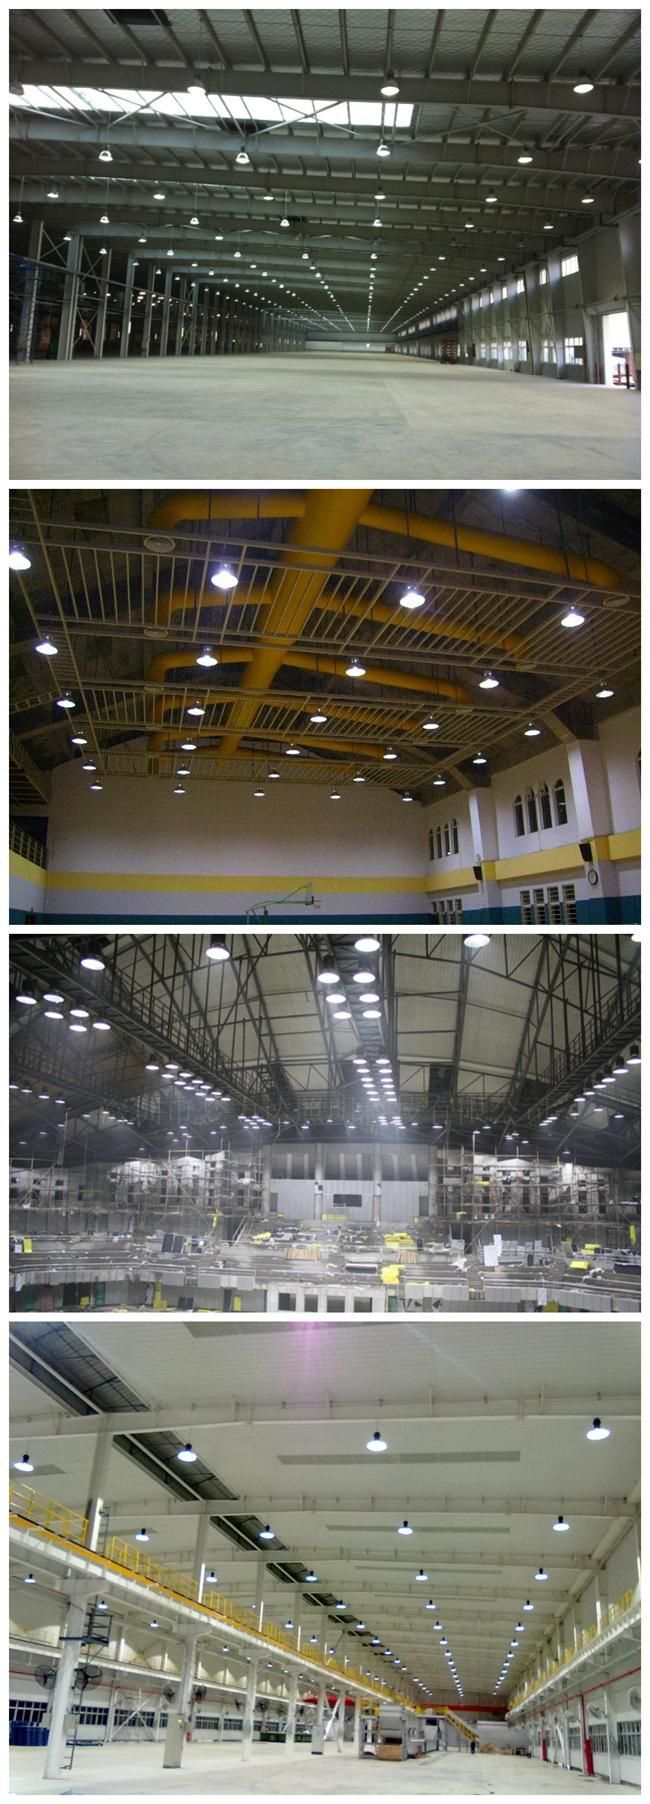 Private Model 100W 200W 300W Industrial Cold-Forging LED High Bay Light